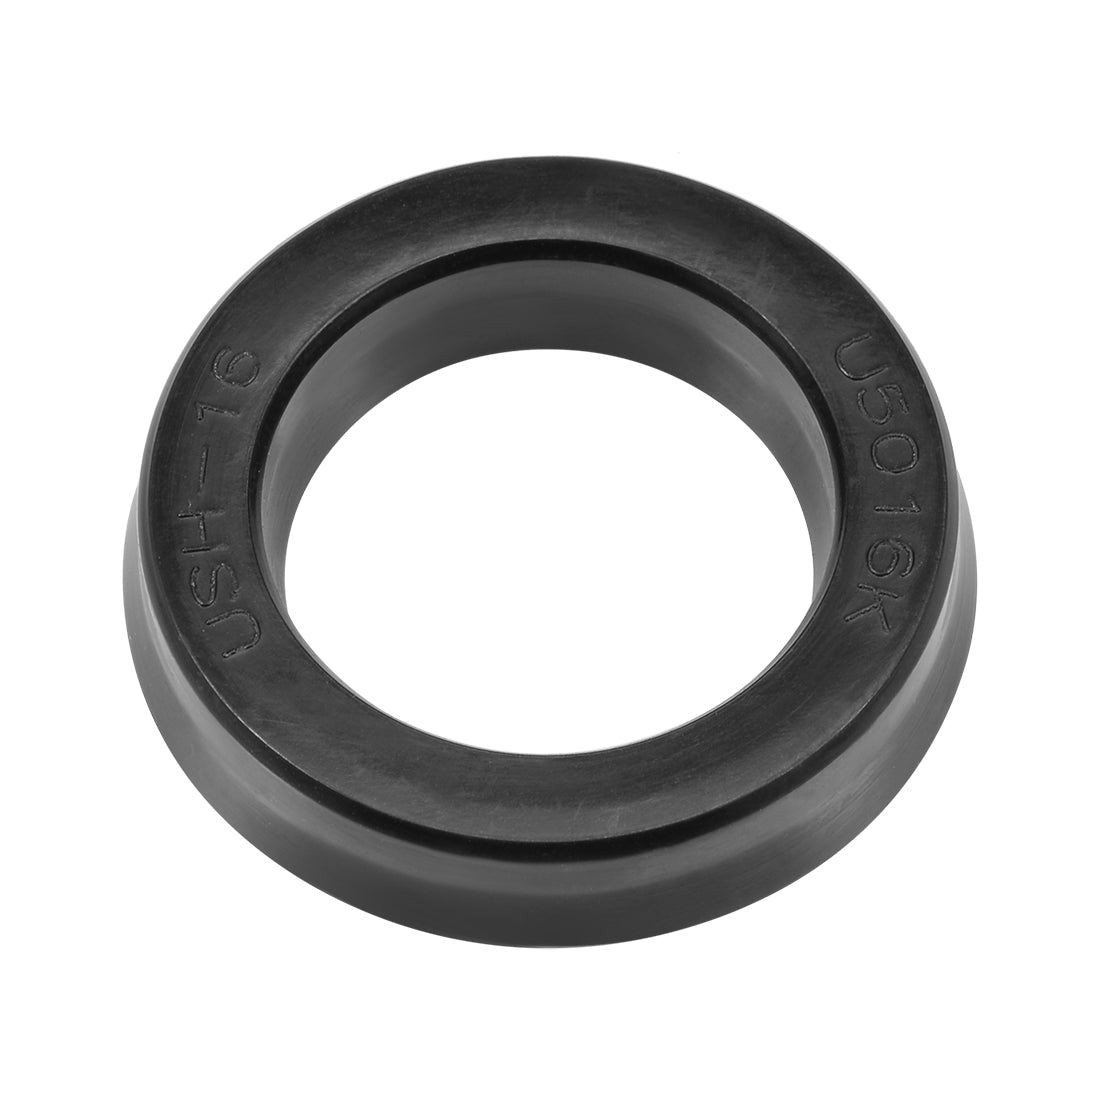 uxcell Uxcell Hydraulic Seal, Piston Shaft USH Oil Sealing O-Ring, 16mm x 24mm x 5mm